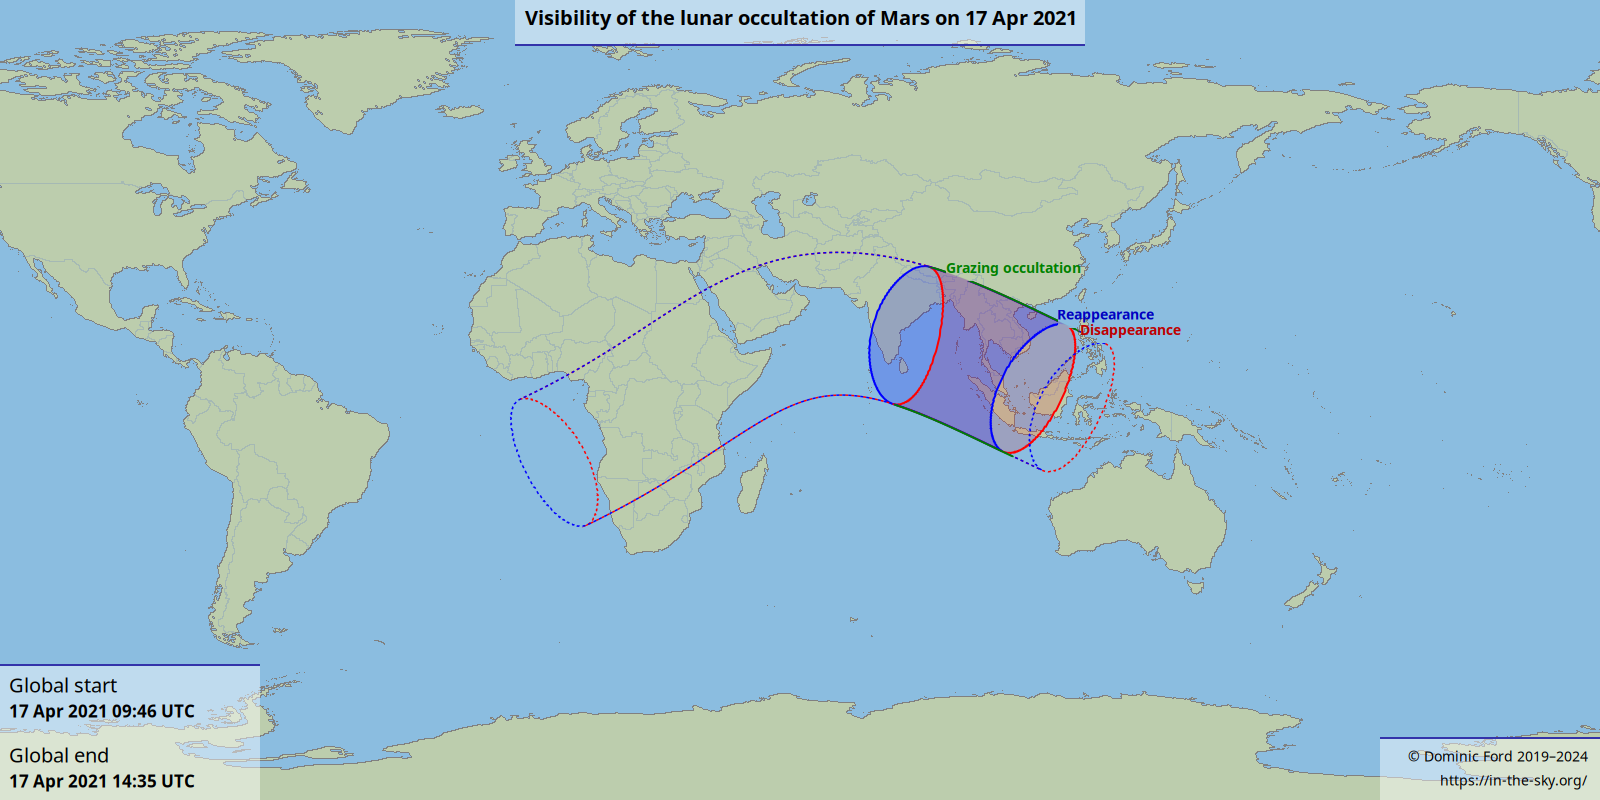 Map showing where the occultation is visible